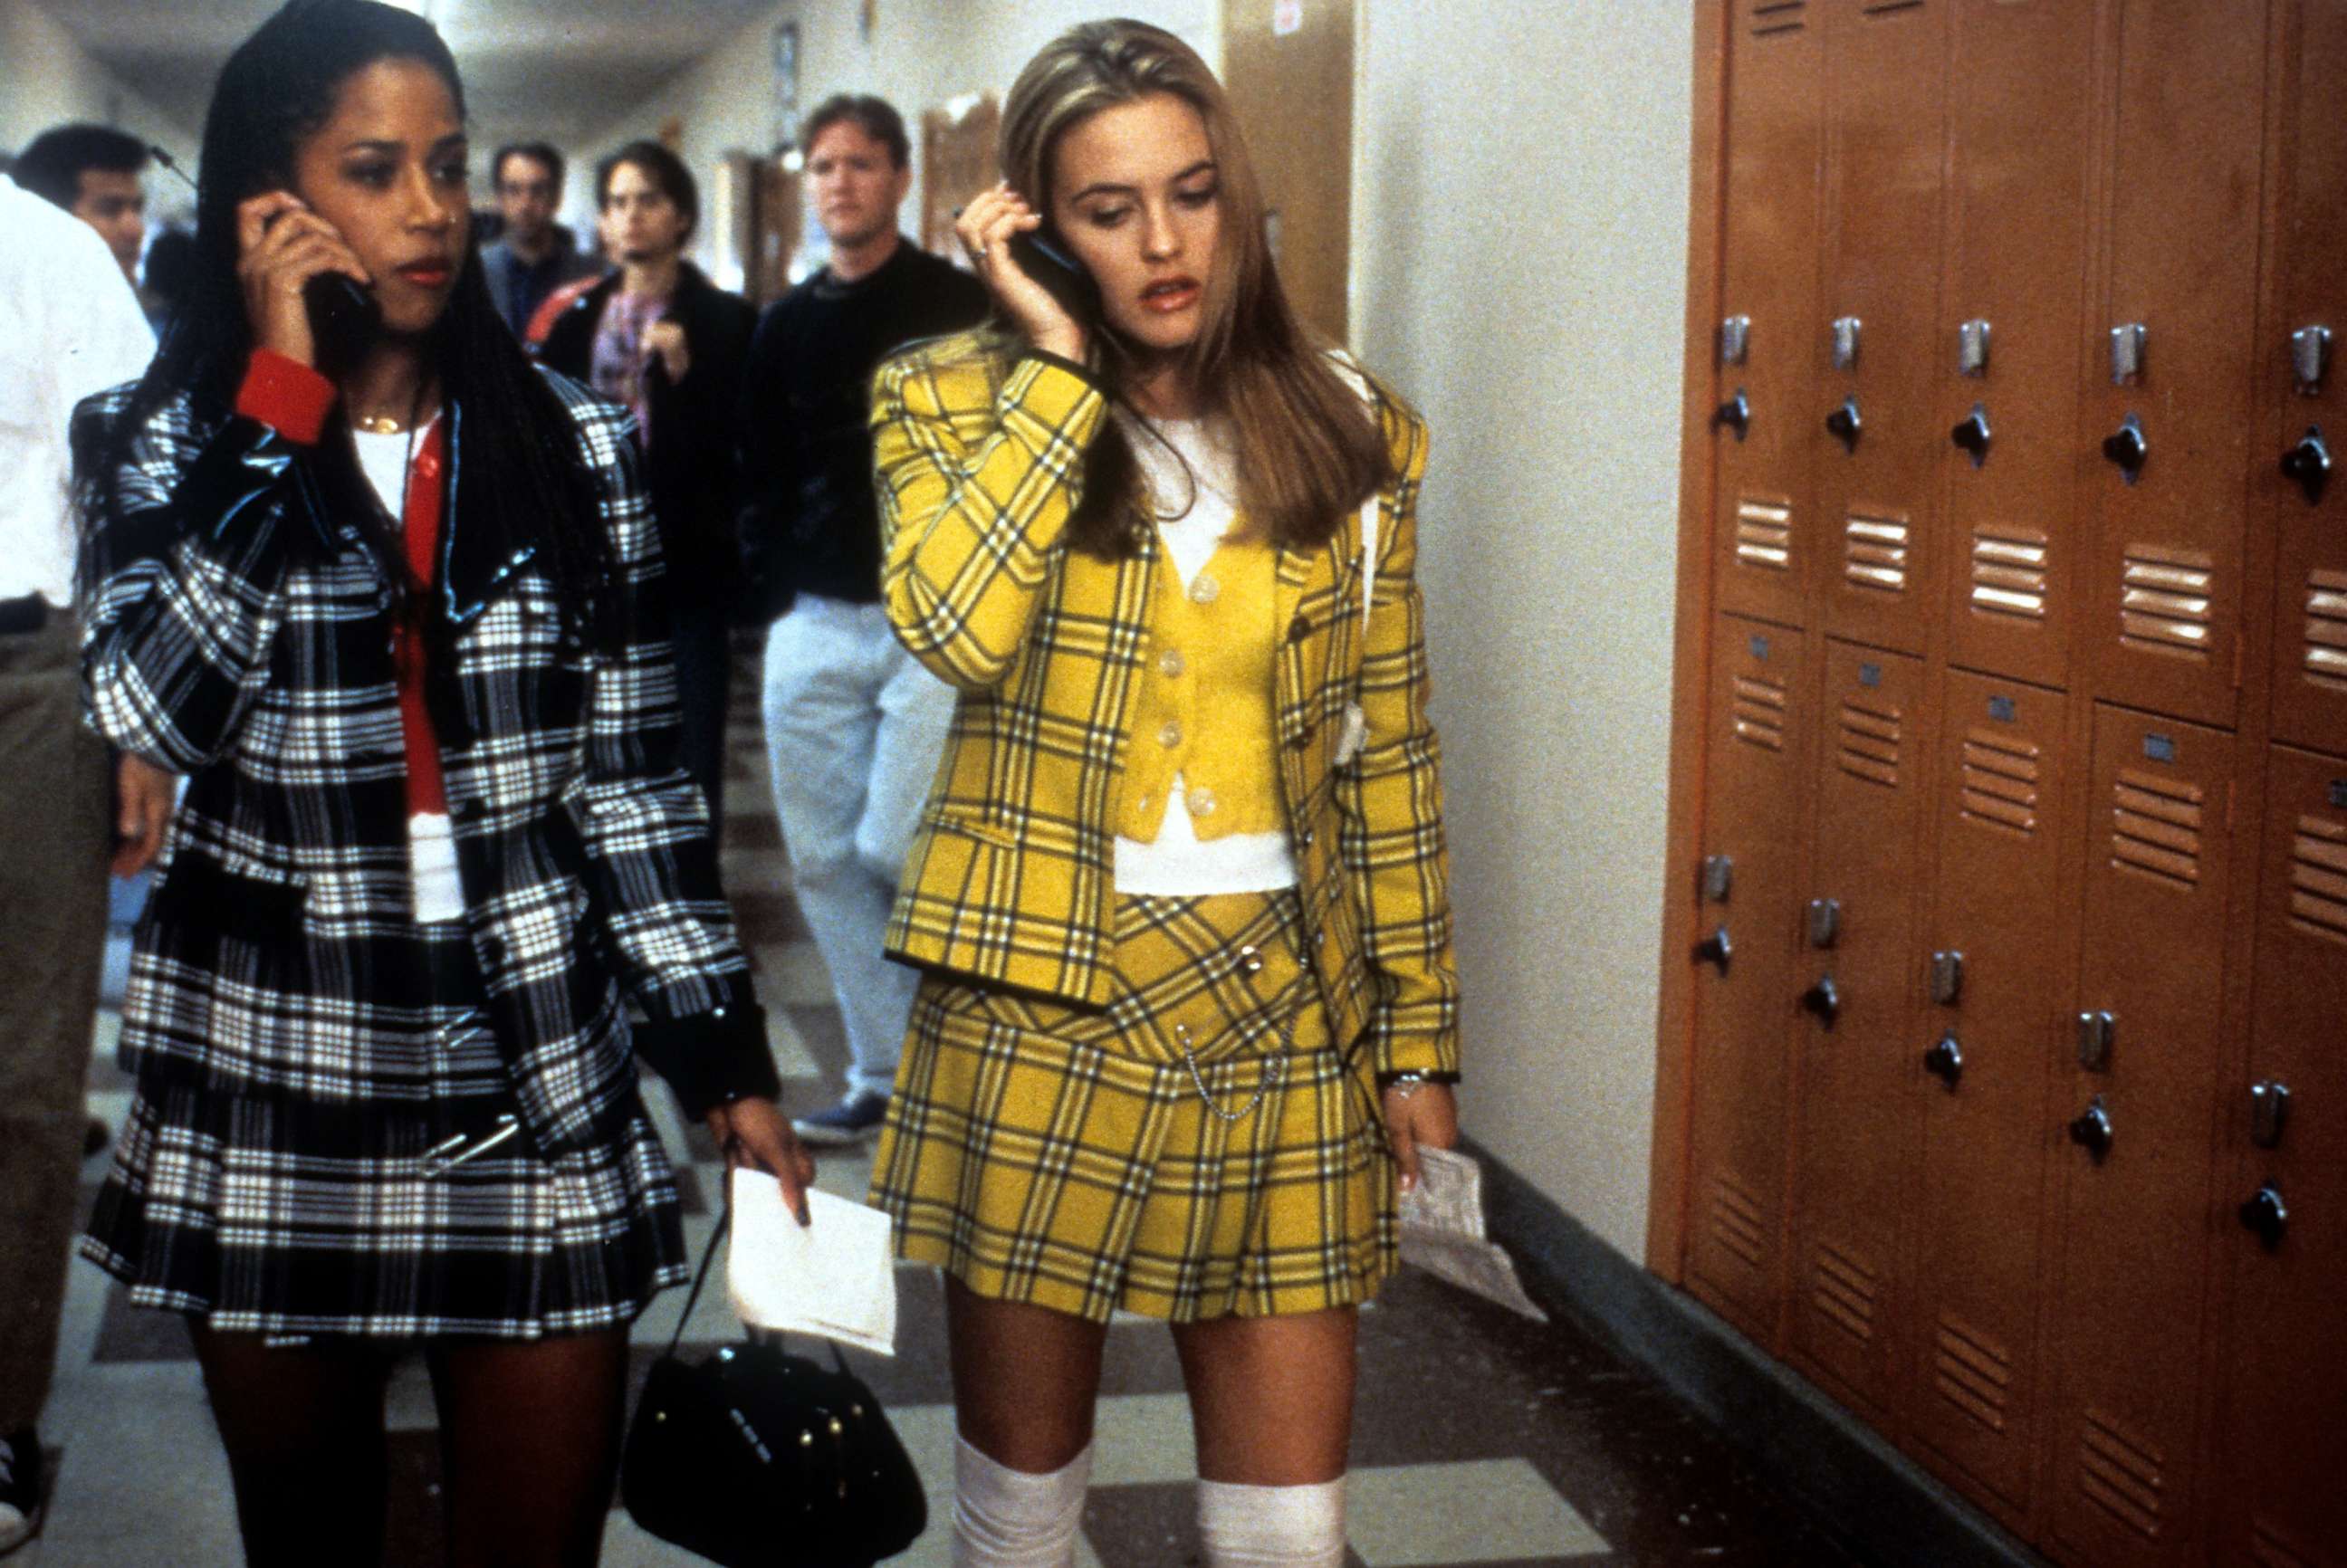 PHOTO: Stacey Dash and Alicia Silverstone talk on their mobile phones in a scene from the film "Clueless," 1995.